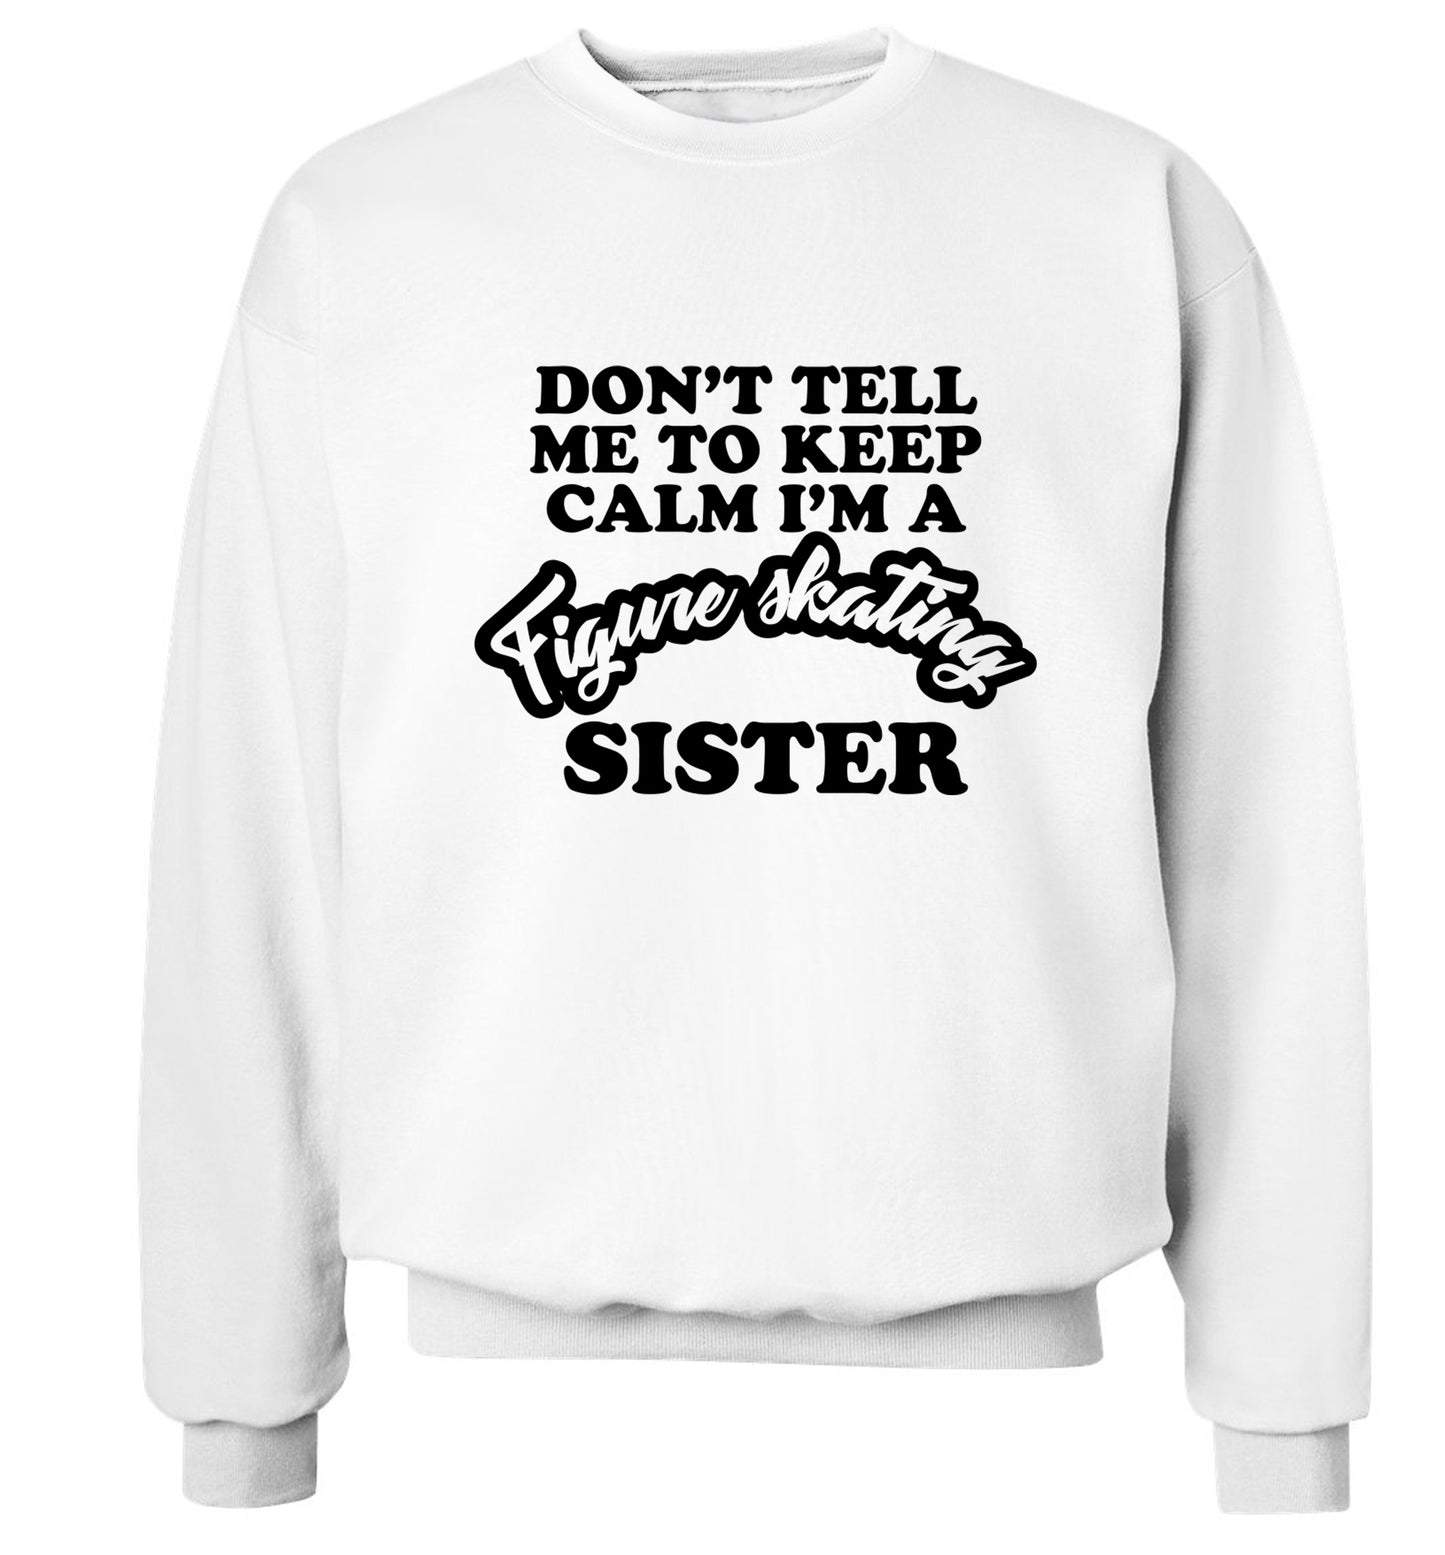 Don't tell me to keep calm I'm a figure skating sister Adult's unisexwhite Sweater 2XL